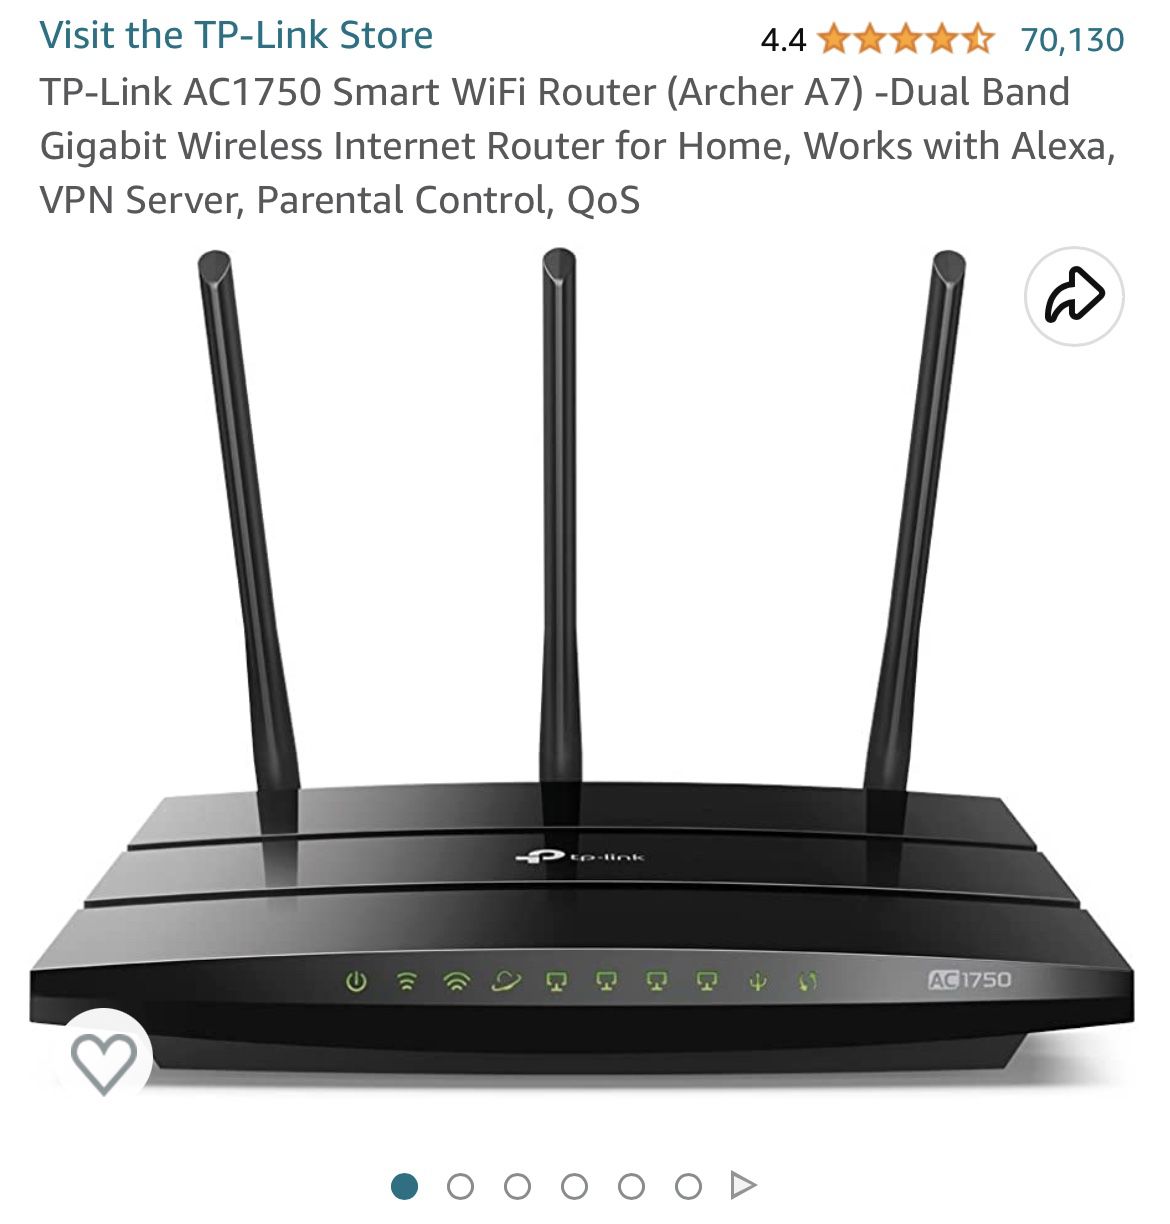 TP-Link AC1750 Smart WiFi Router 